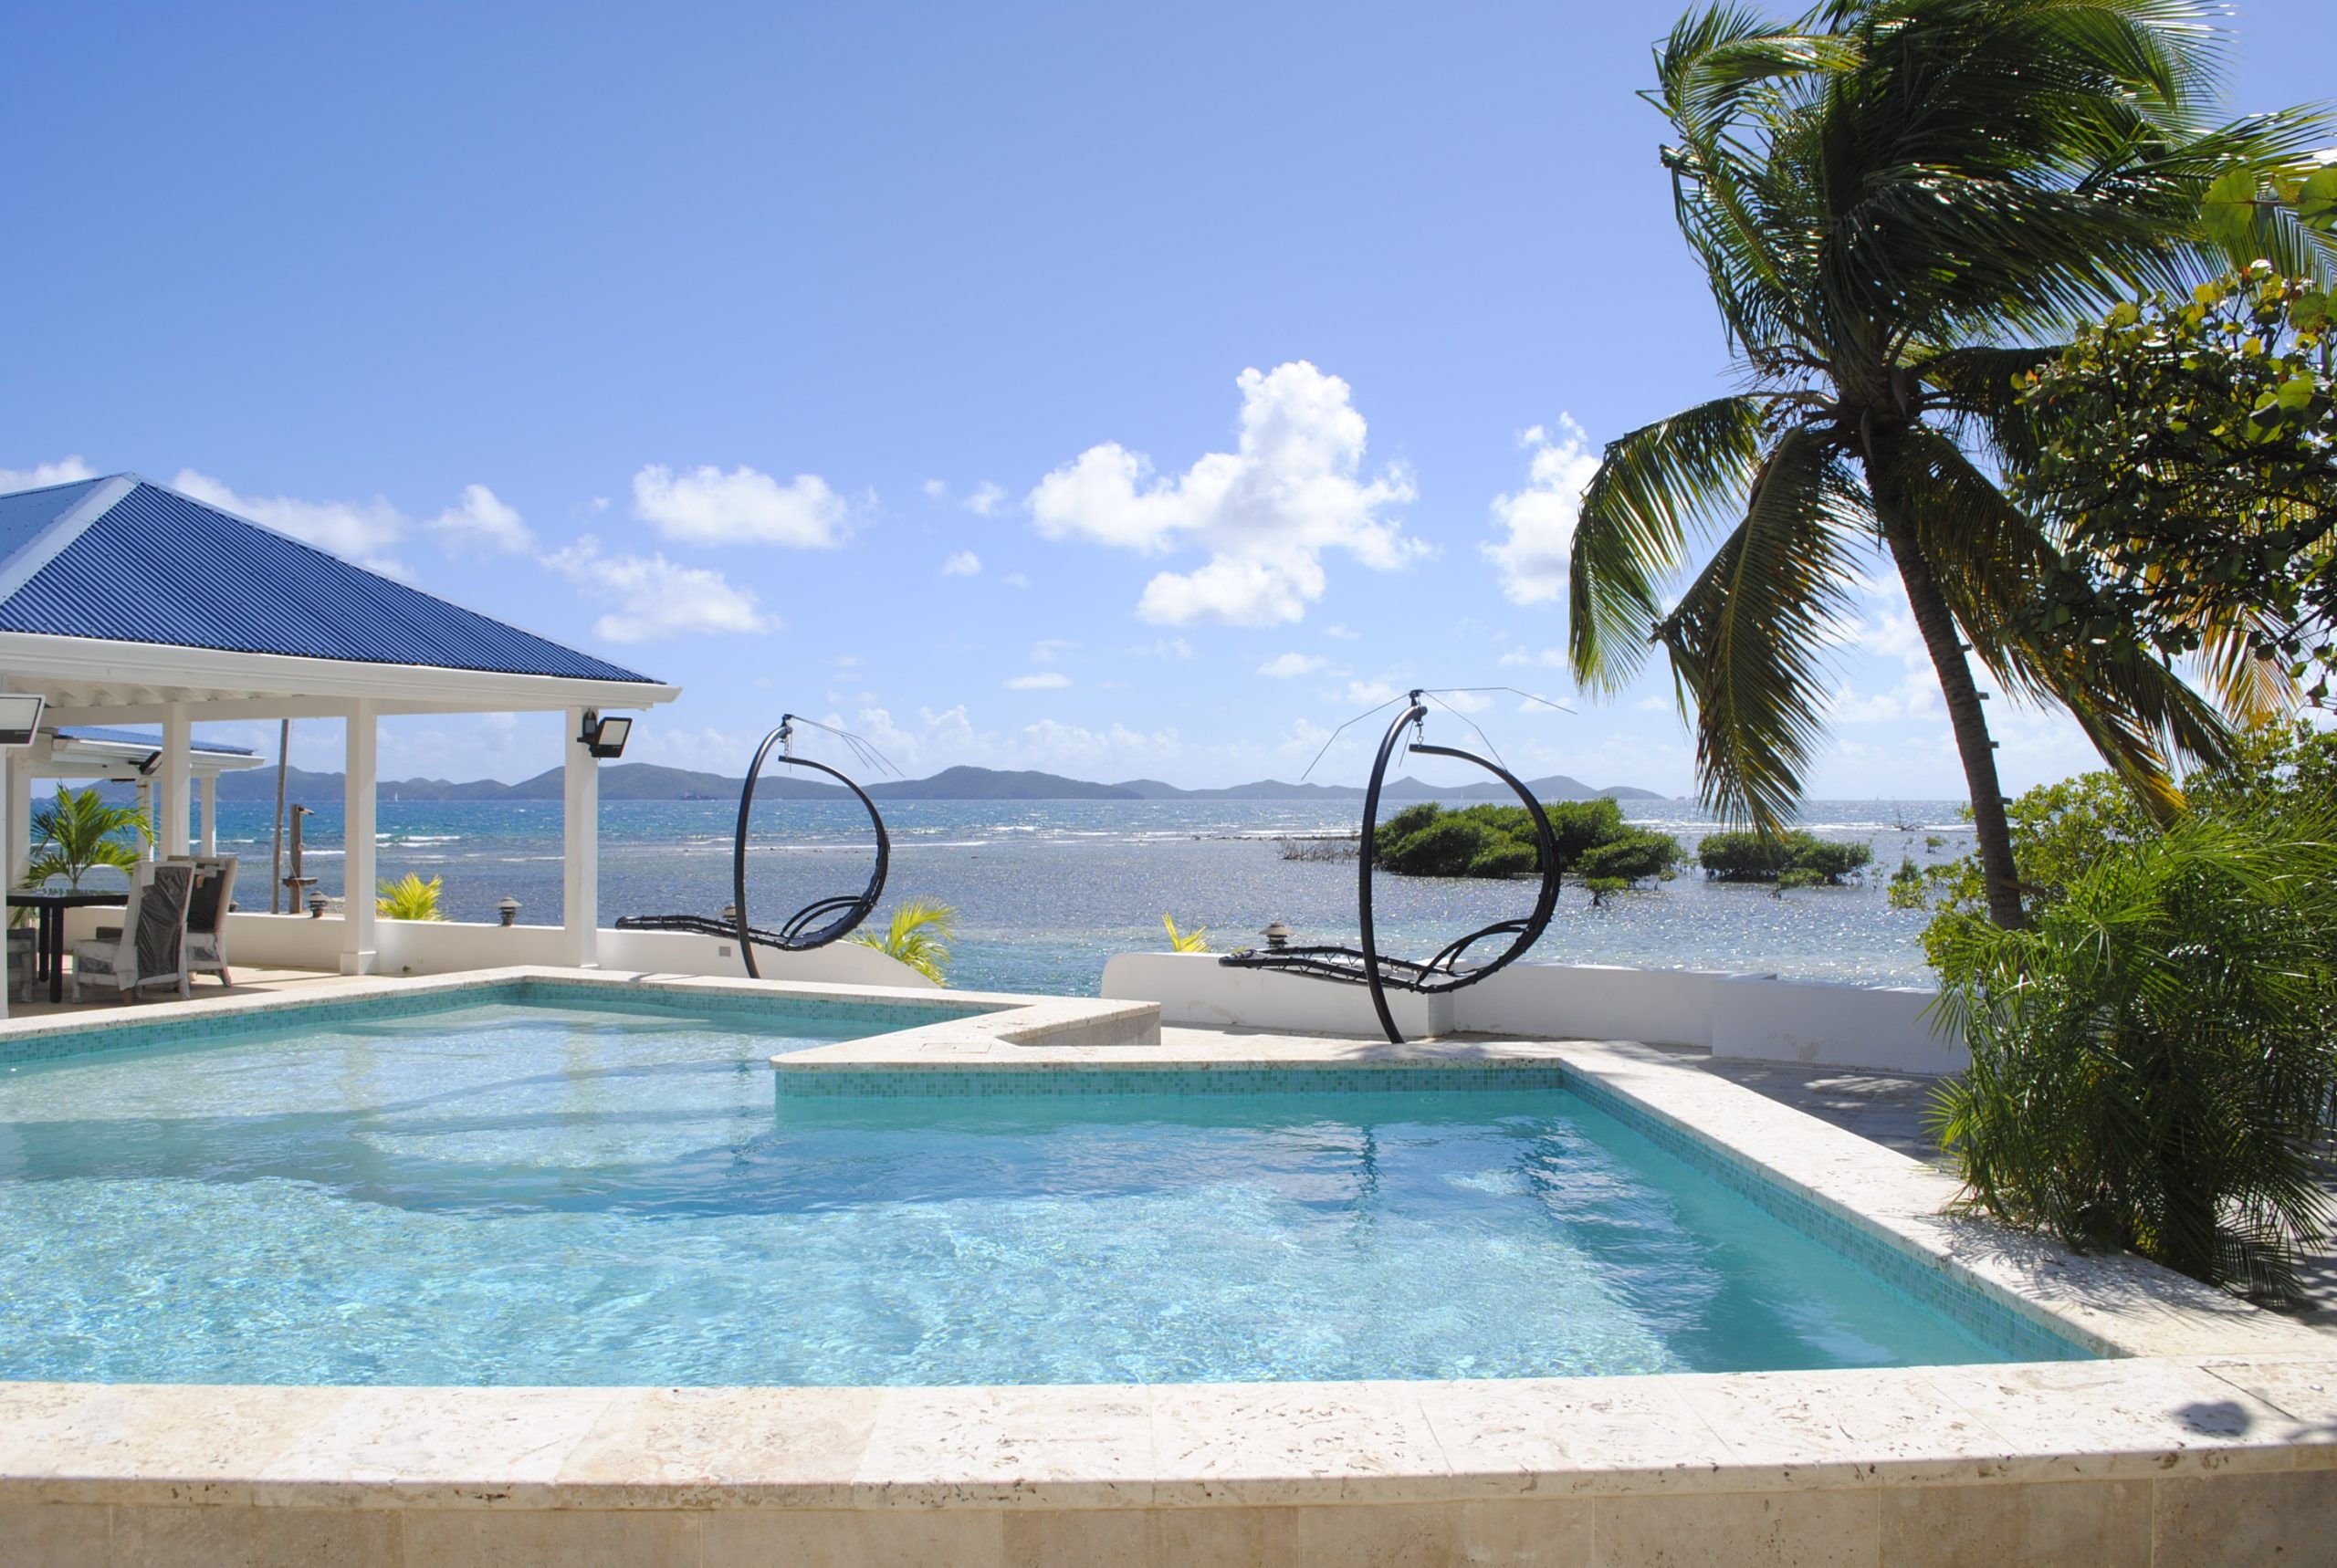 Book Your Short Term Rentals/Airbnb in the Virgin Islands Here!